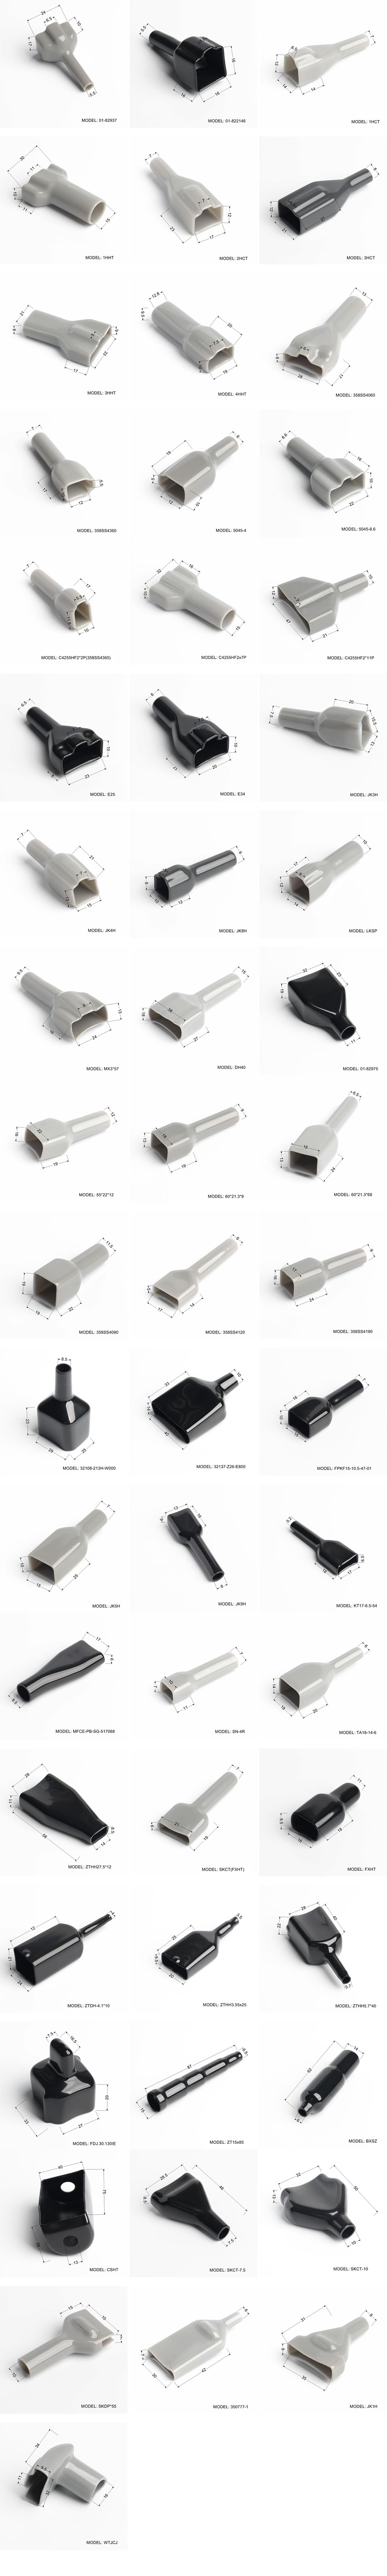 connector cover,wire connector sleeve,terminal connector covers, electrical connector cover, harness connector cover, pvc connector cover, connector covers